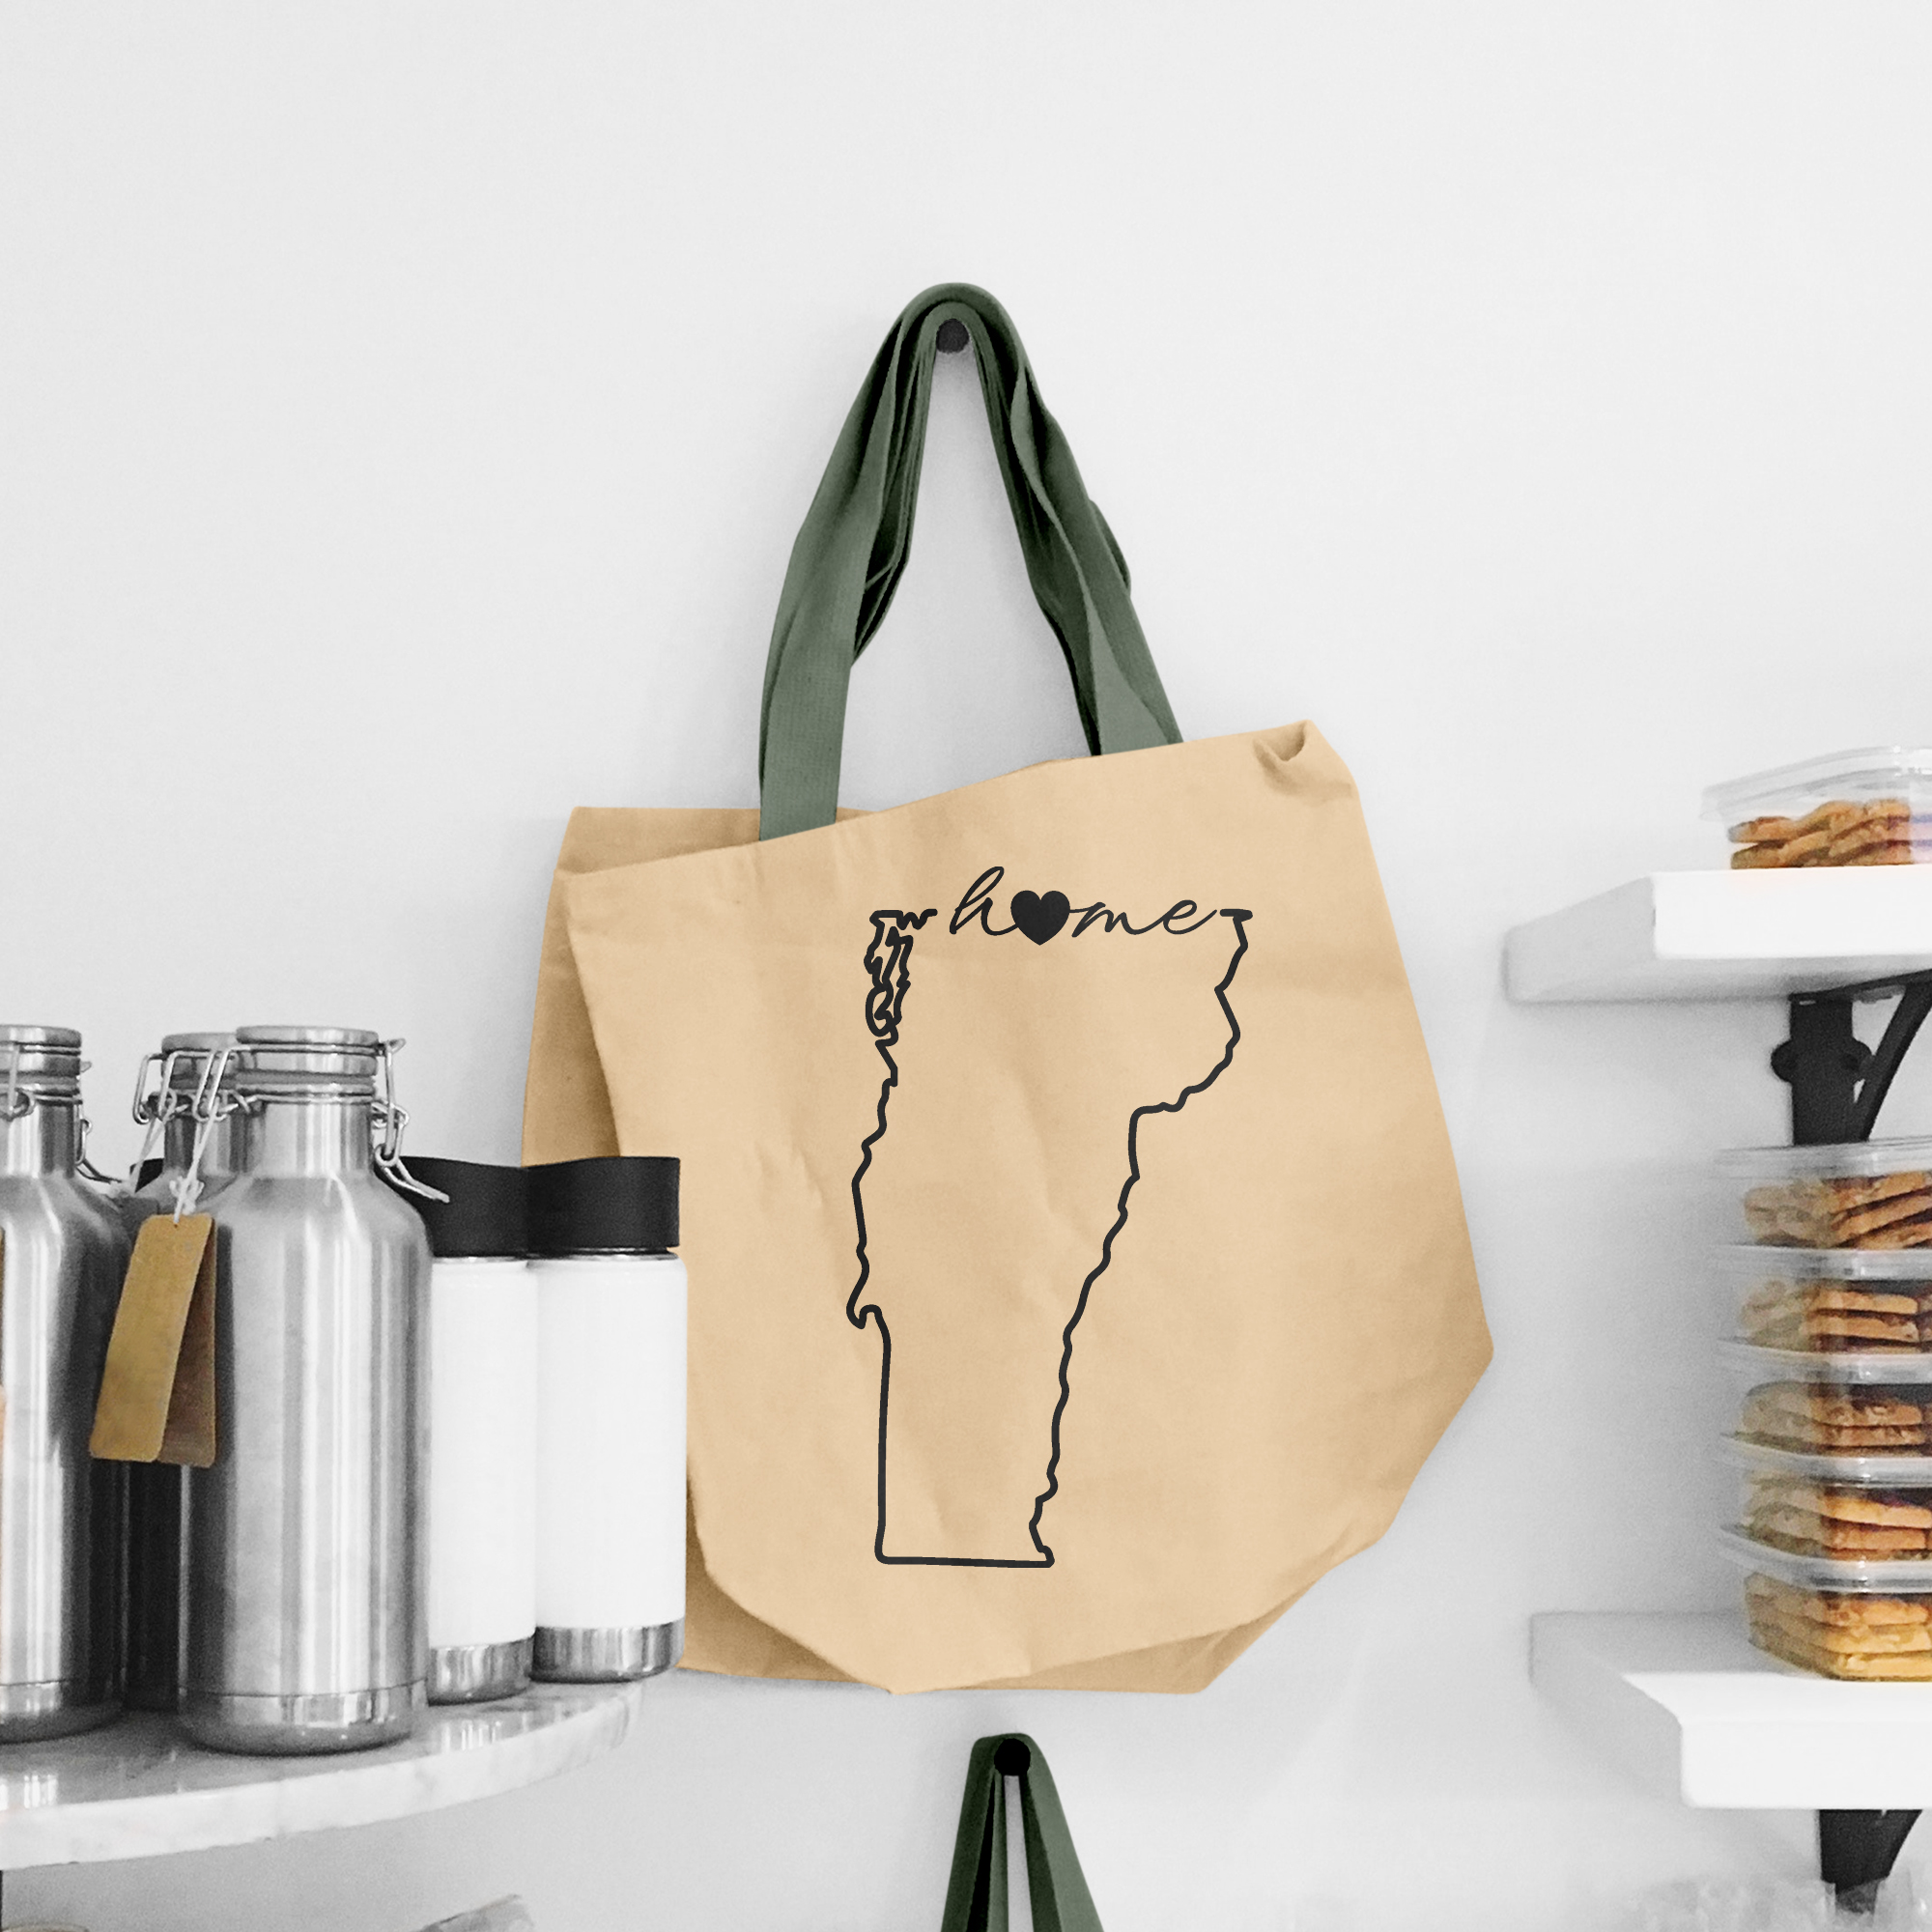 Black illustration of map of Vermont on the beige shopping bag with dirty green handle.